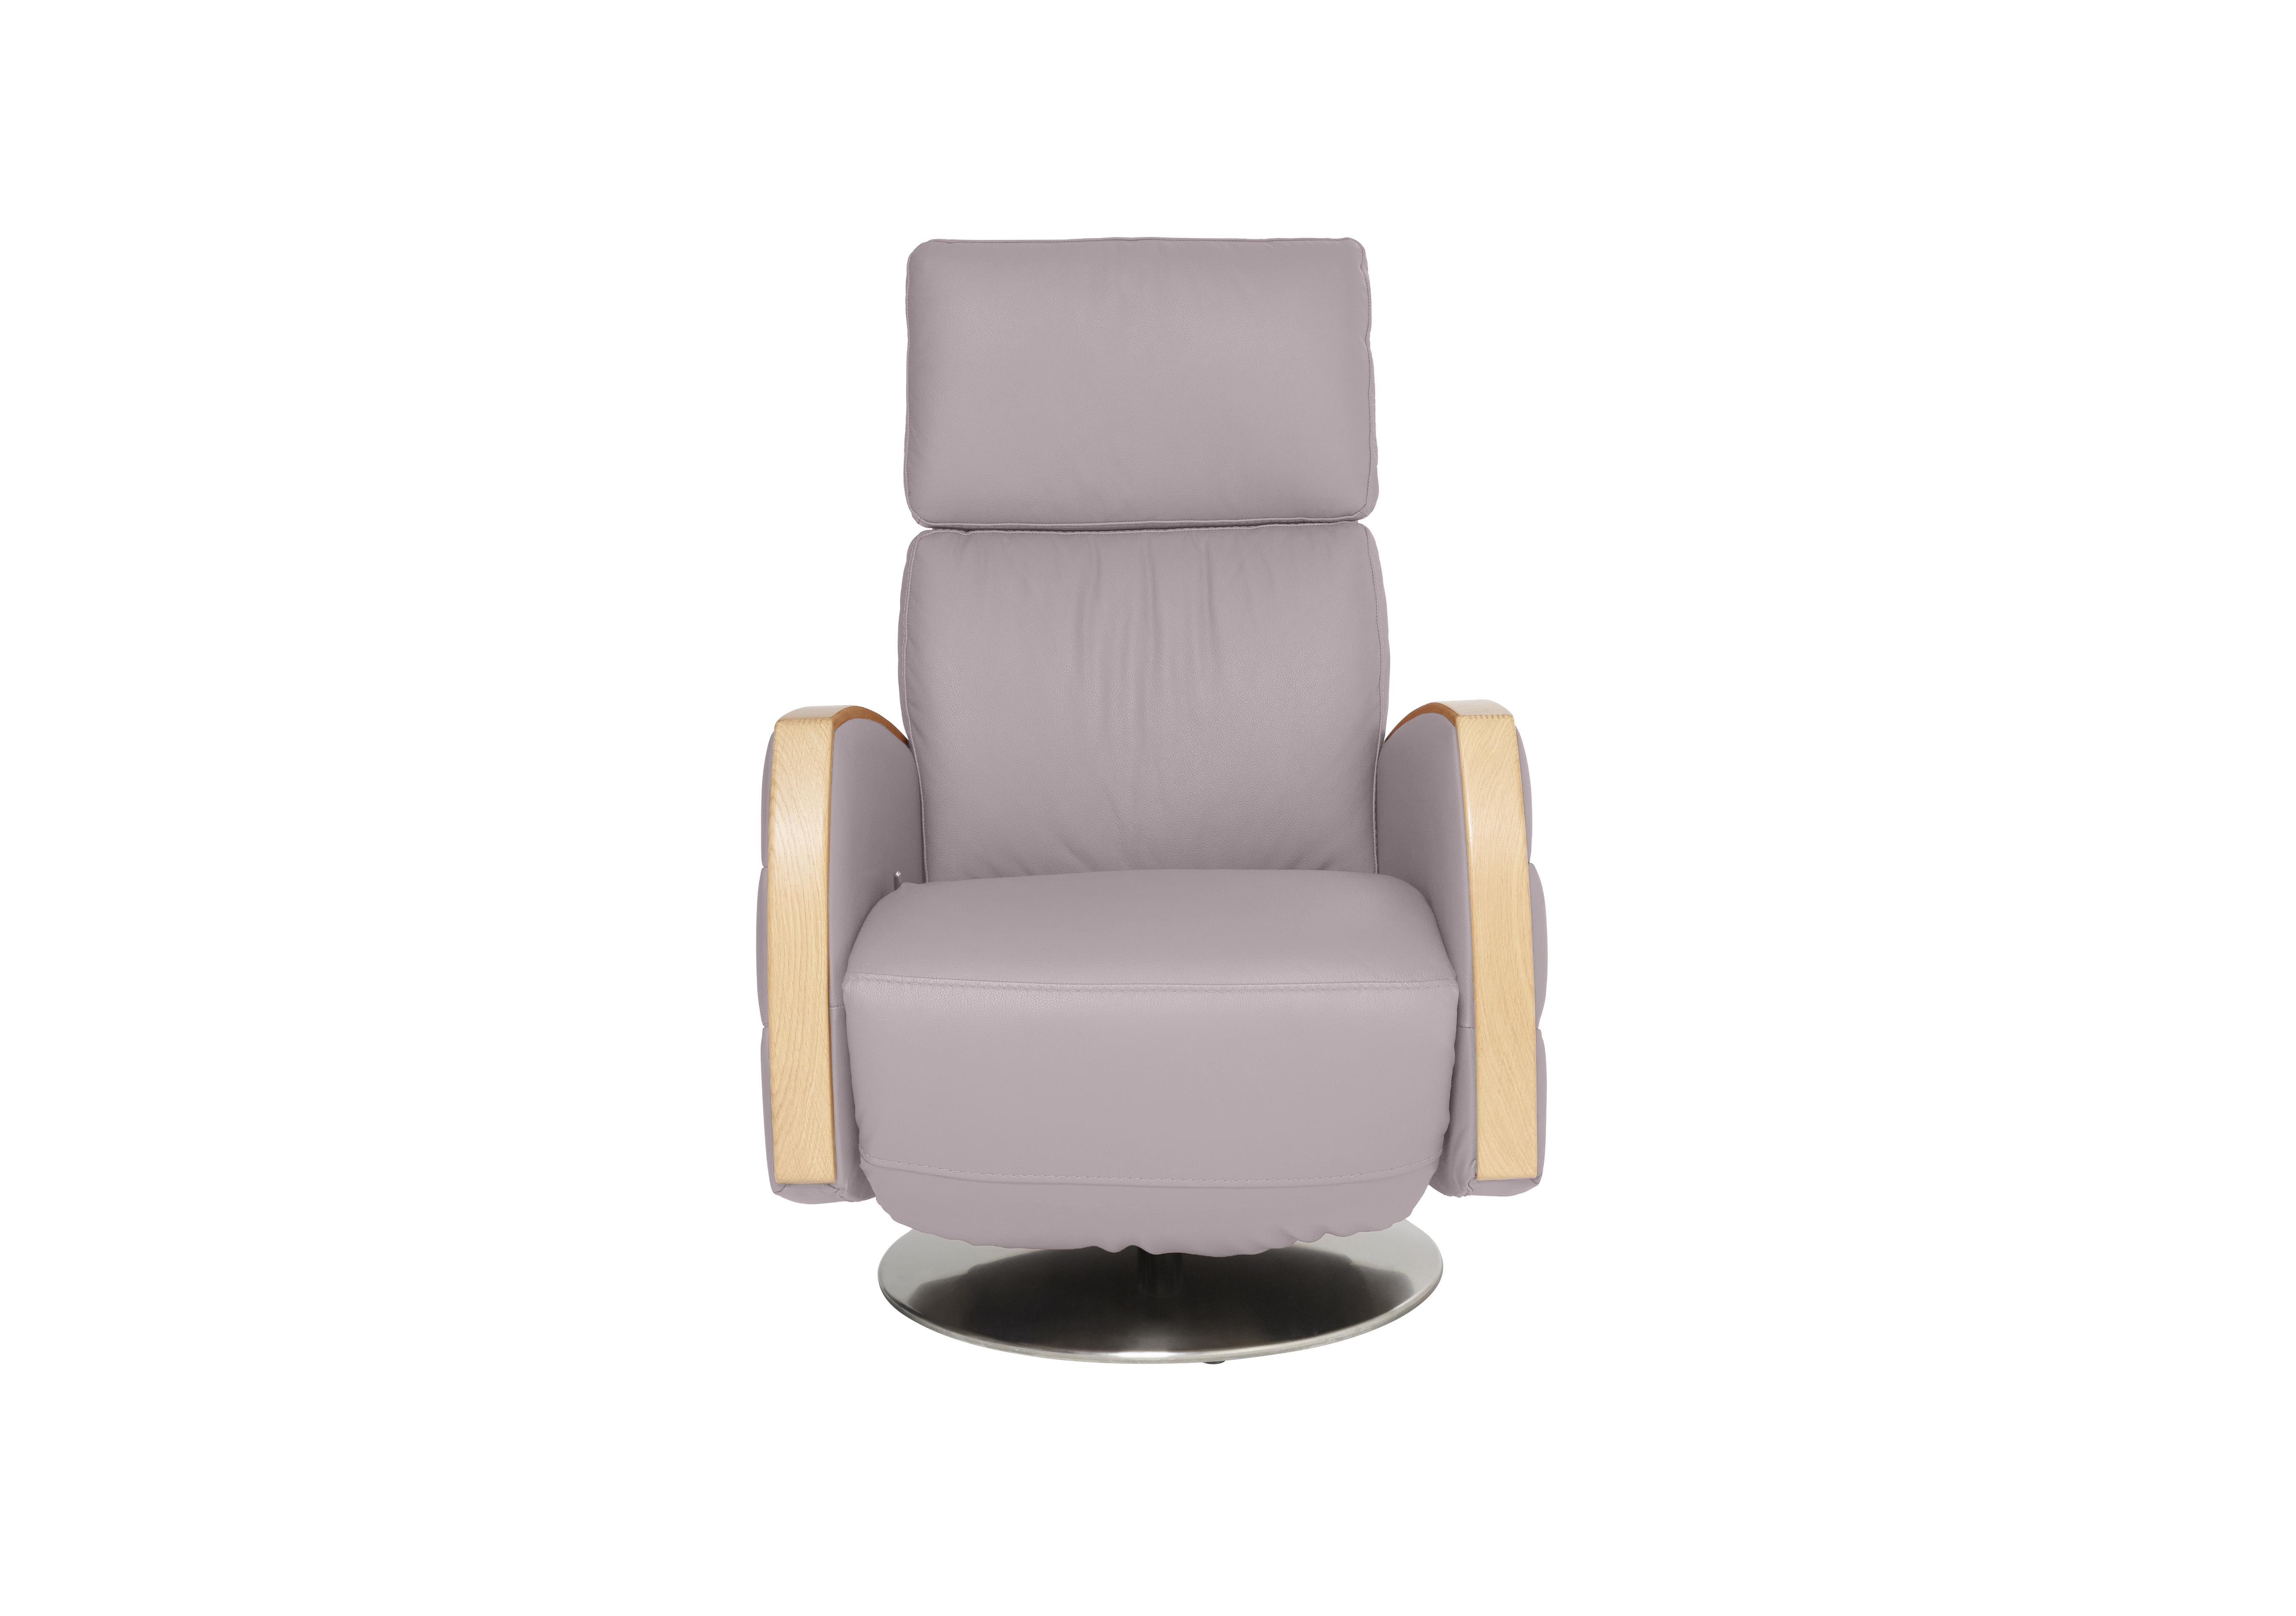 Noto Leather Recliner Chair in L906 Grey 2 on Furniture Village